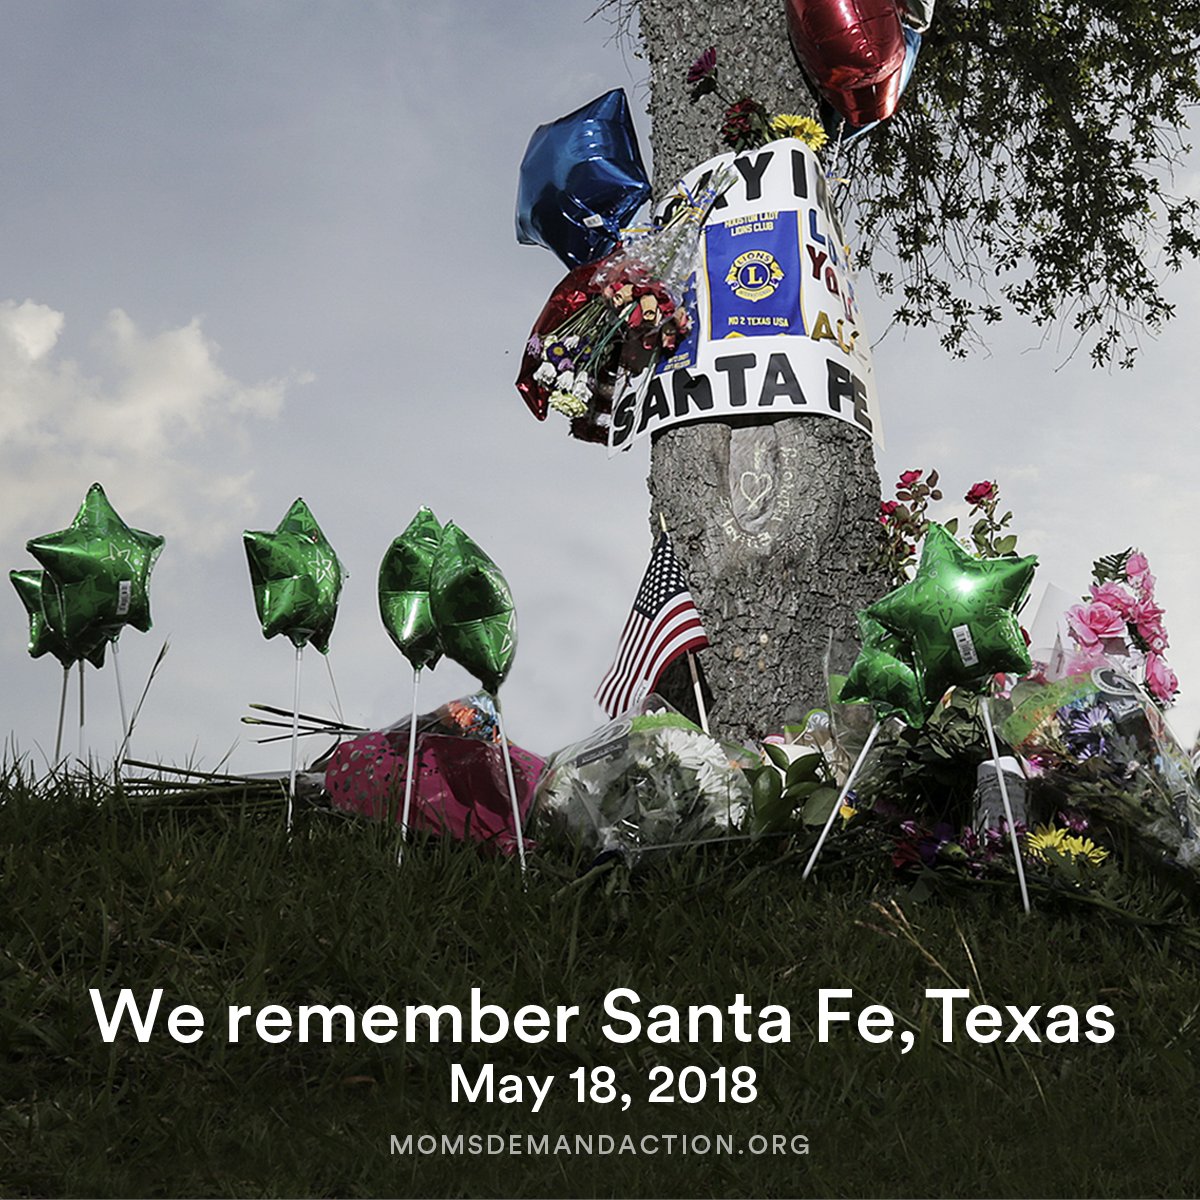 On this day five years ago, ten people were killed and 13 were wounded when a gunman entered Santa Fe High School in Santa Fe, Texas, and opened fire. We hold those devastated by this senseless tragedy in our hearts and pledge to act in their honor.